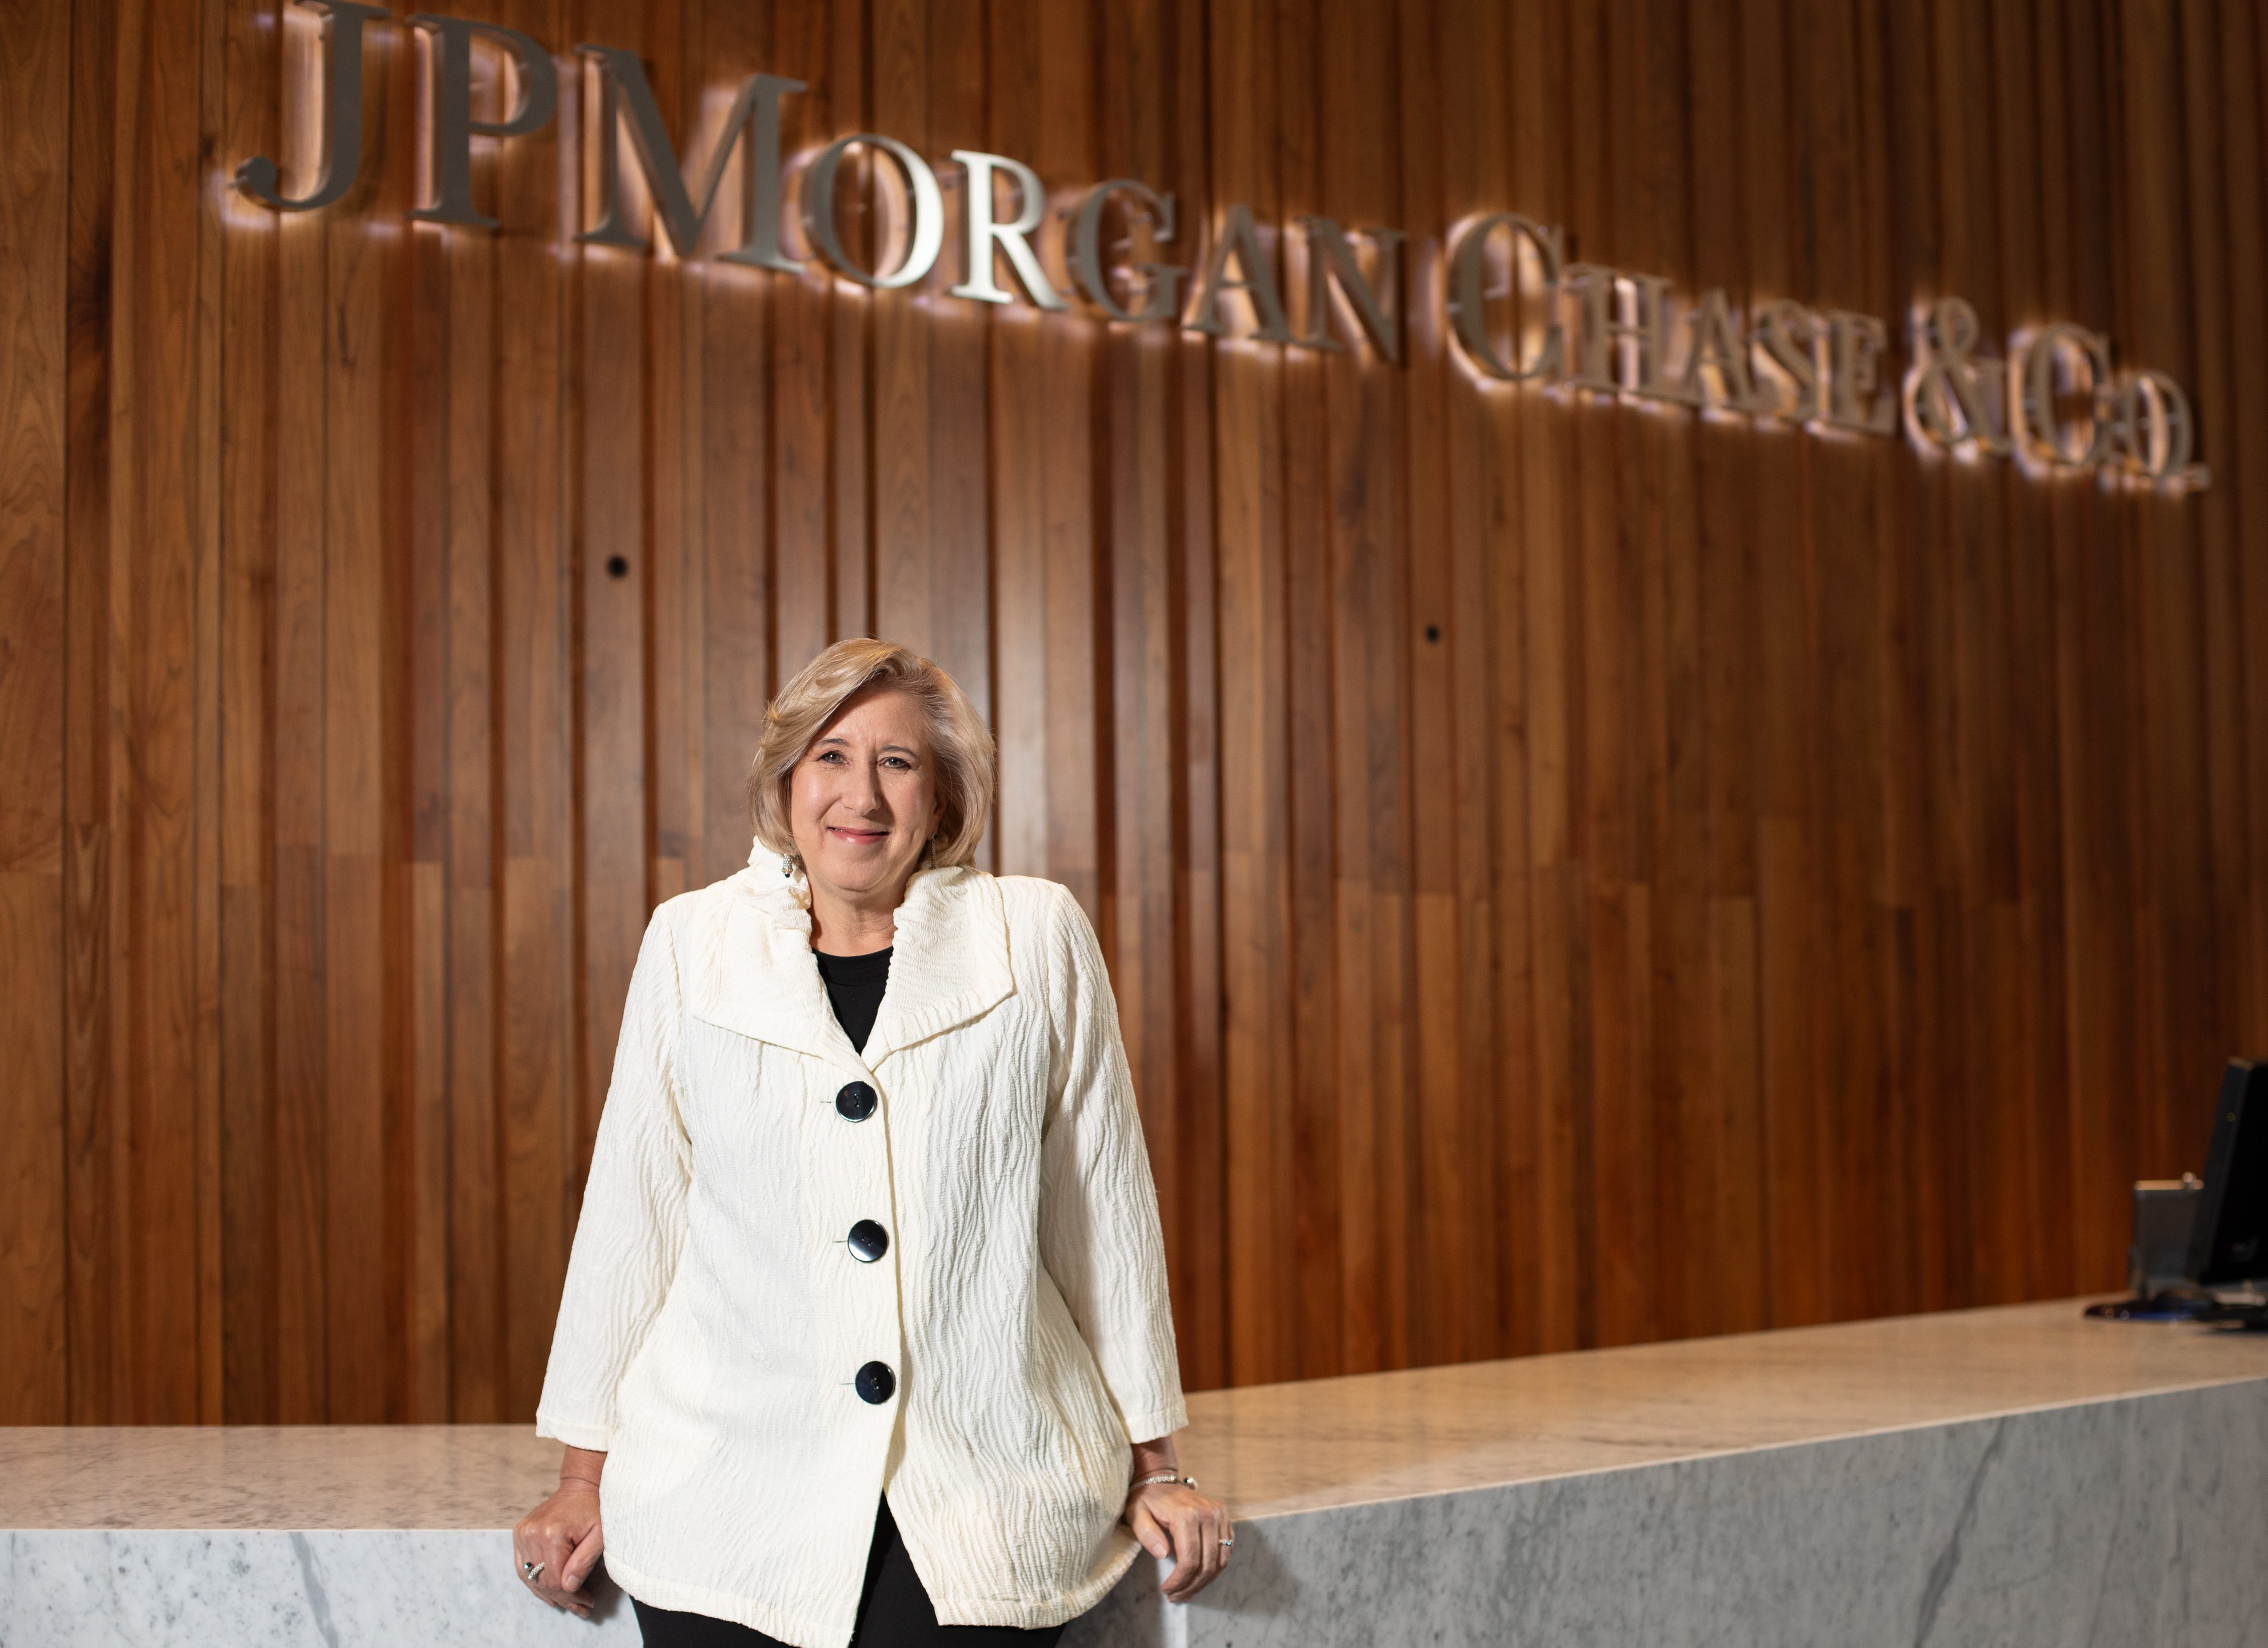 Corrine Burger, managing director and Columbus market leader for JPMorgan Chase & Co., is the 2023 CEO of the Year winner in the Large For-Profit category.